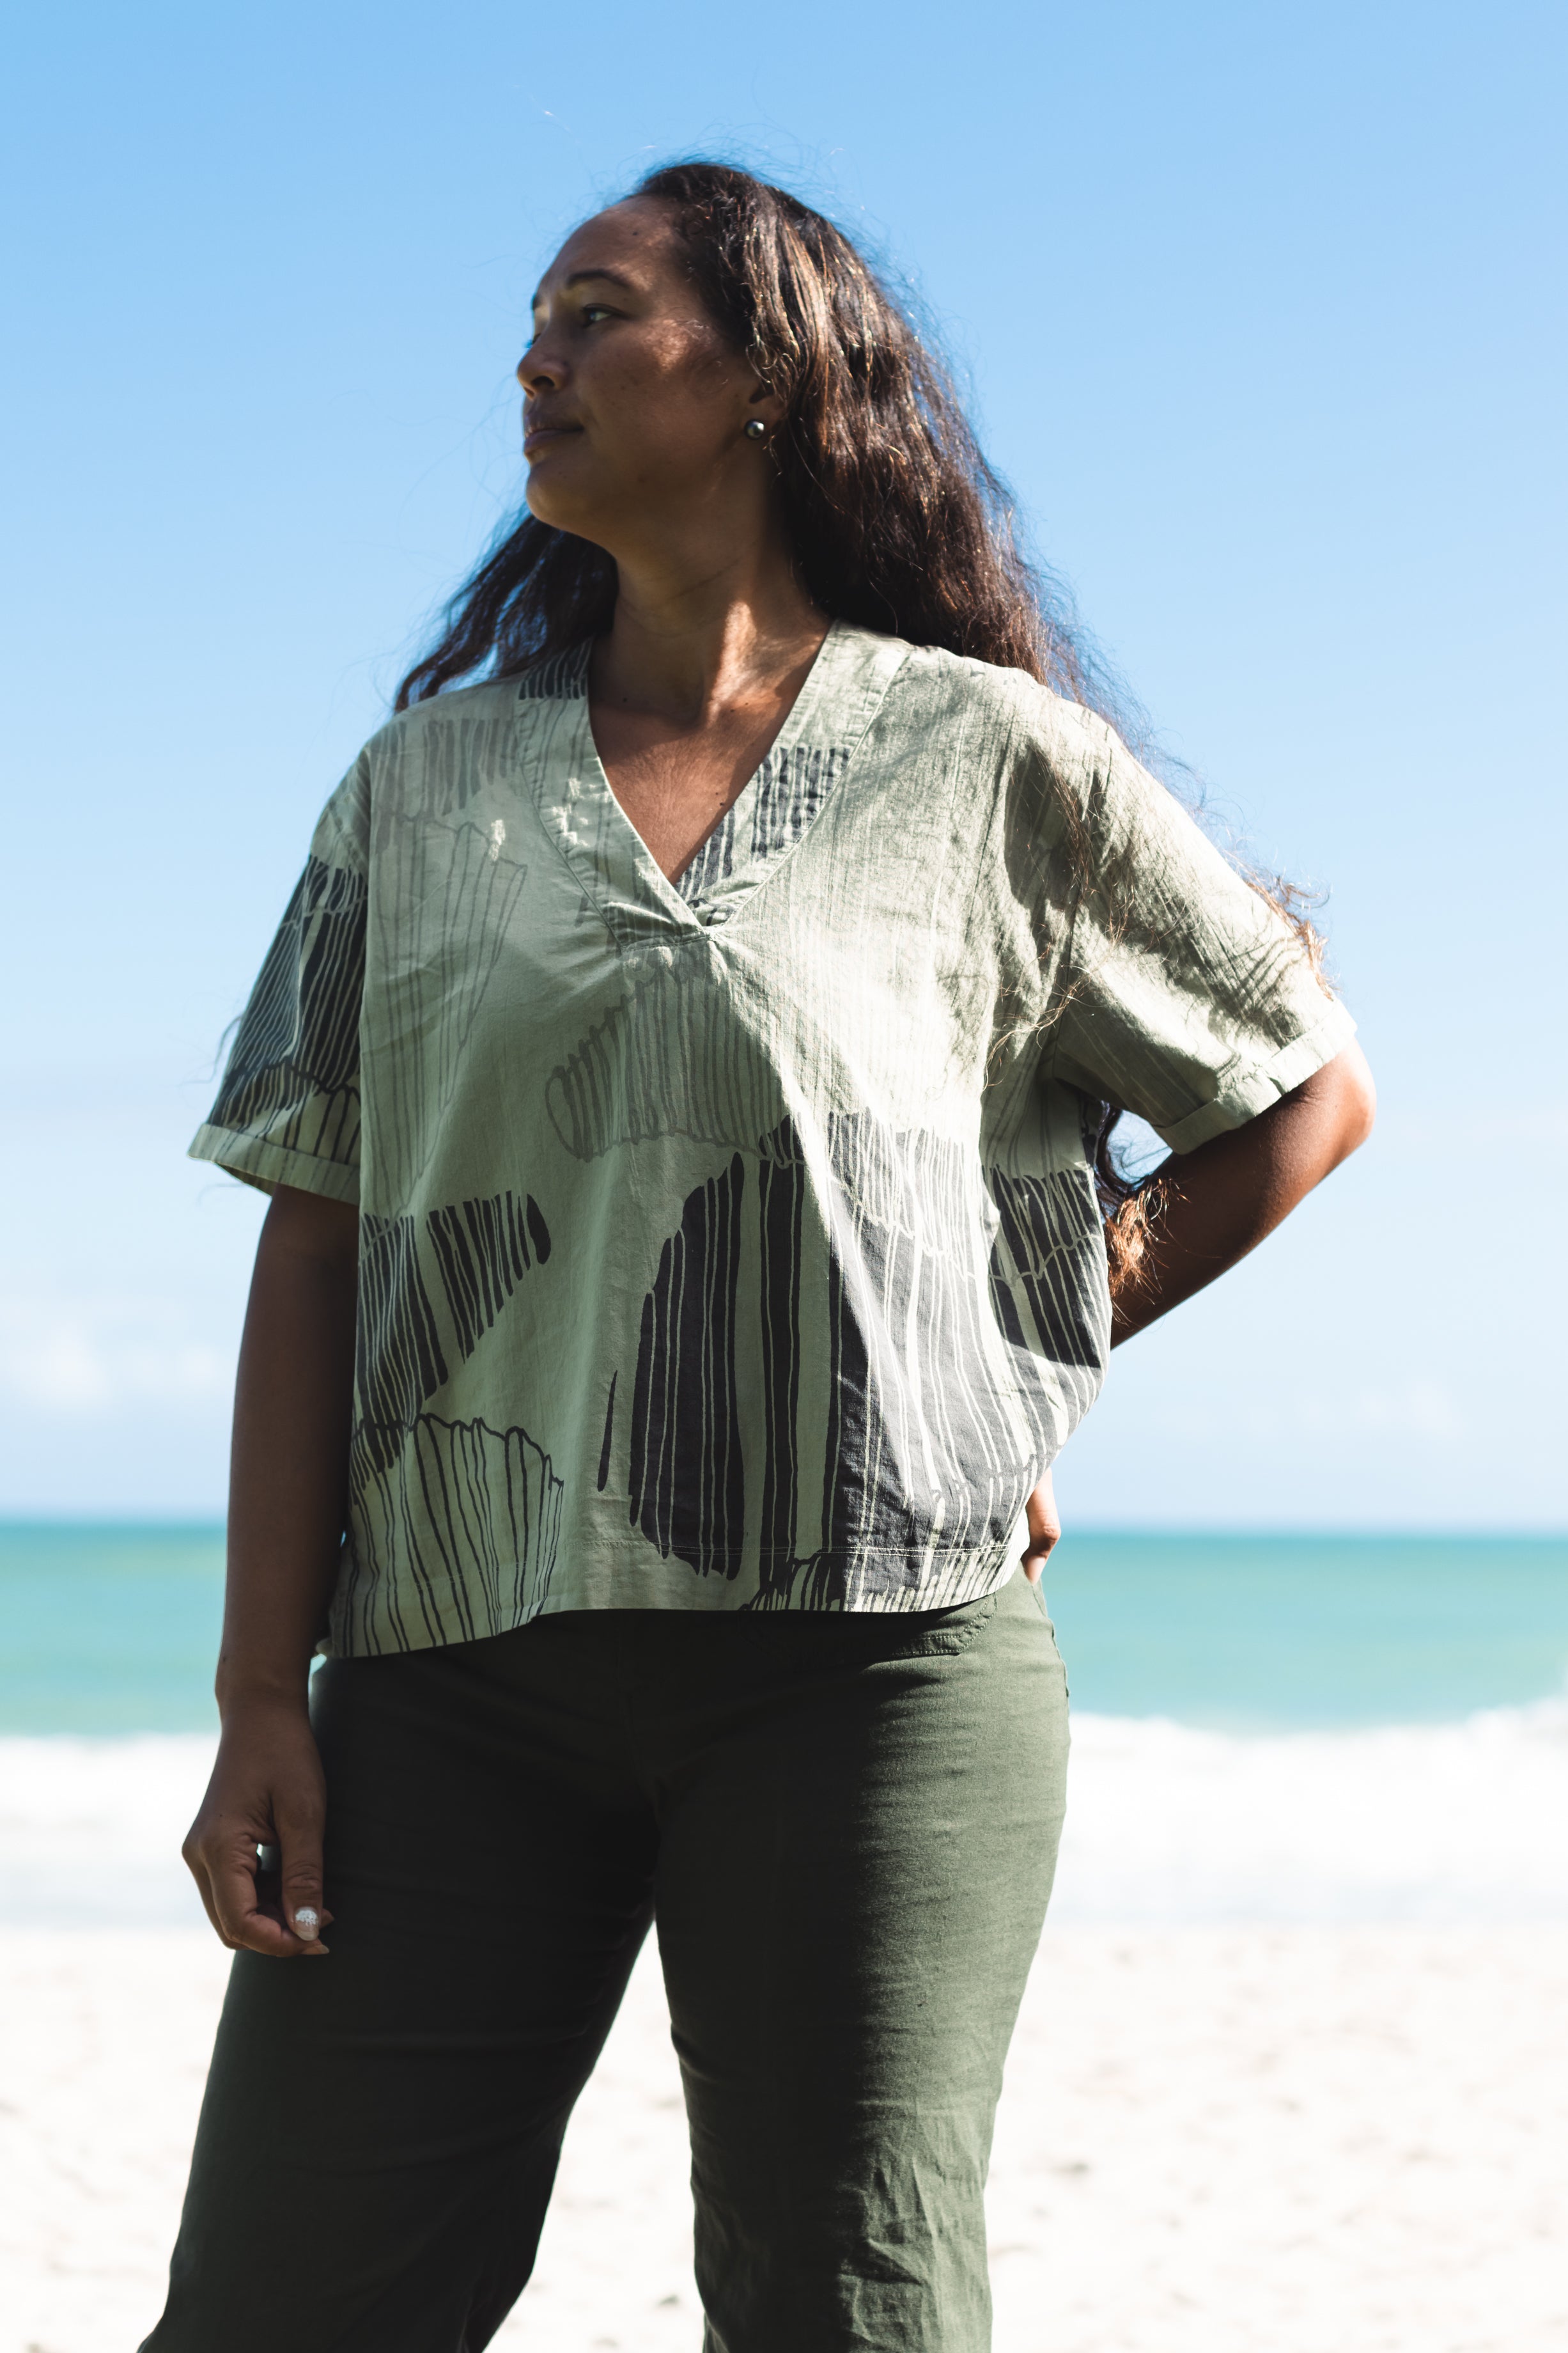 Kāhuli 2 - Newcombia canaliculata | Vneck Top - green